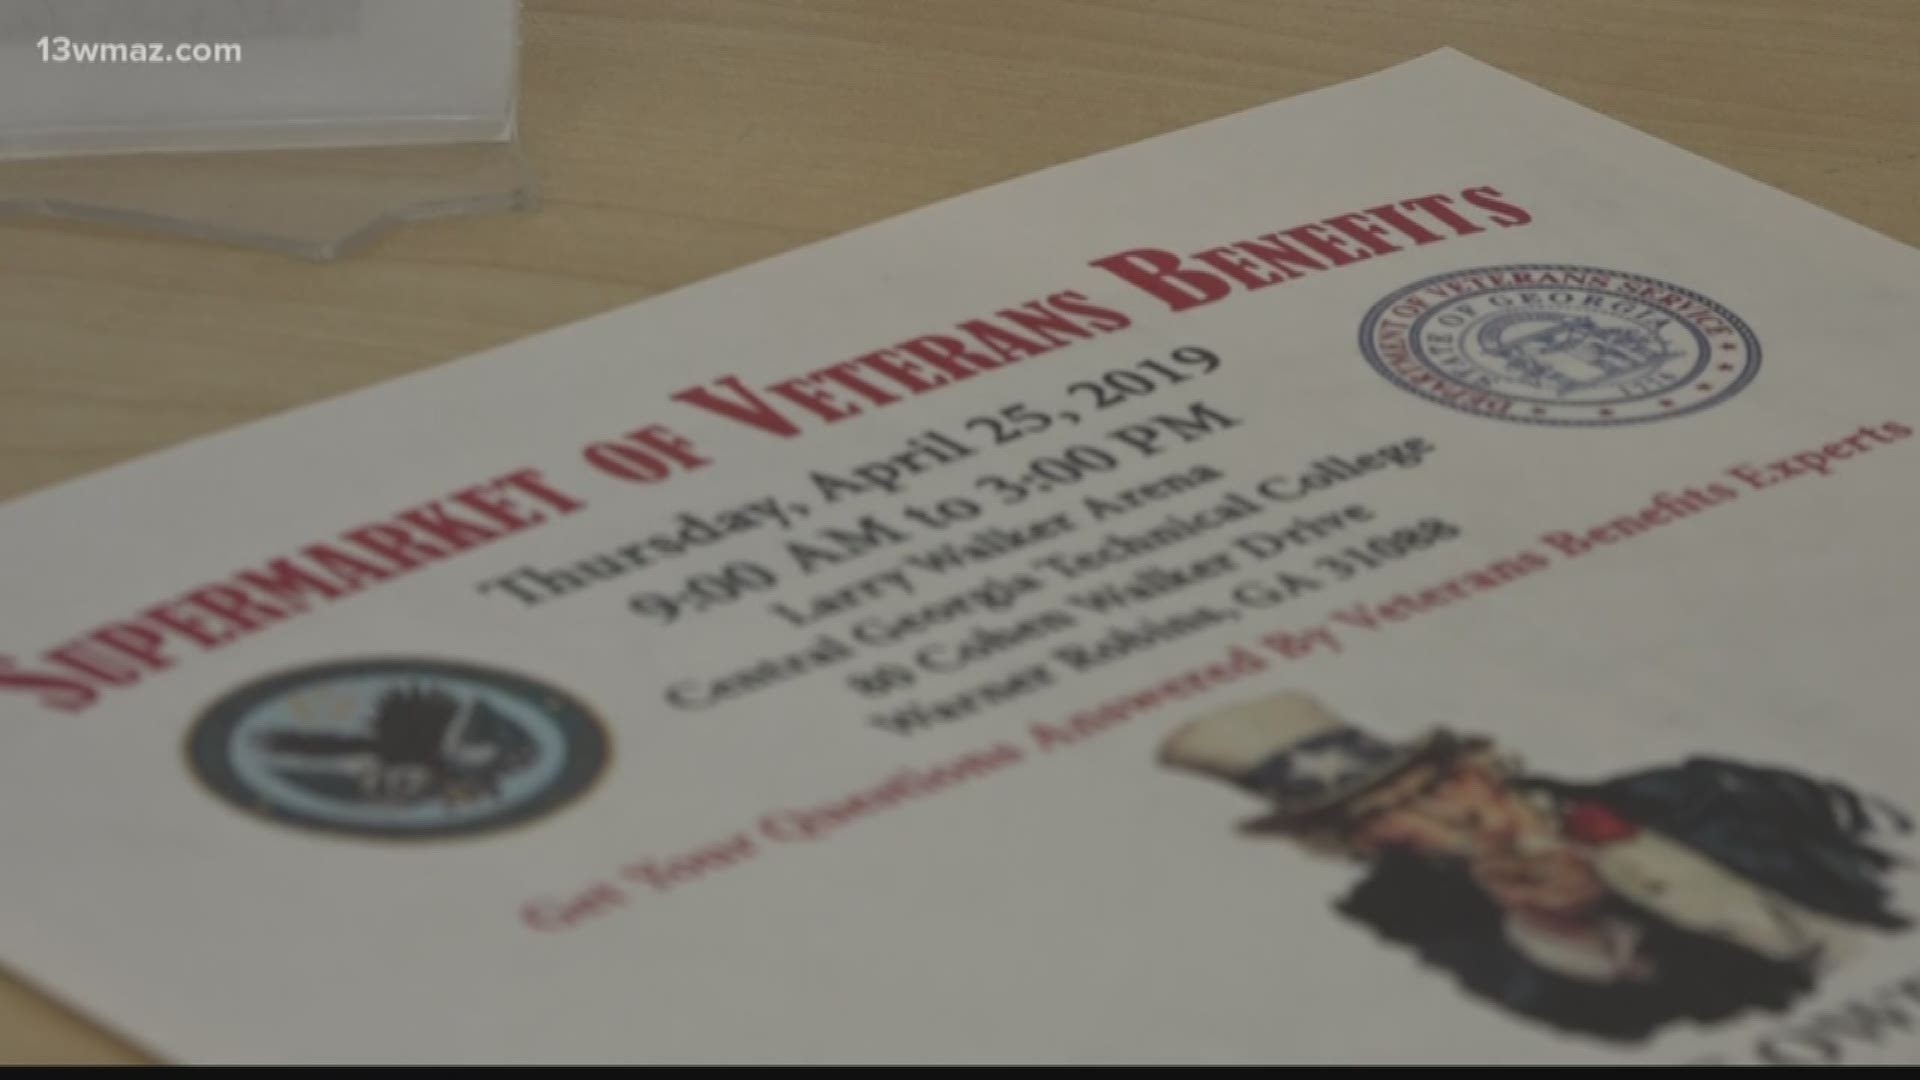 Central Georgia Technical College is hosting a supermarket for veterans and family members to learn more about veterans benefits. People from federal, state, and local agencies will answer questions, explain services, and help veterans enroll for benefits.